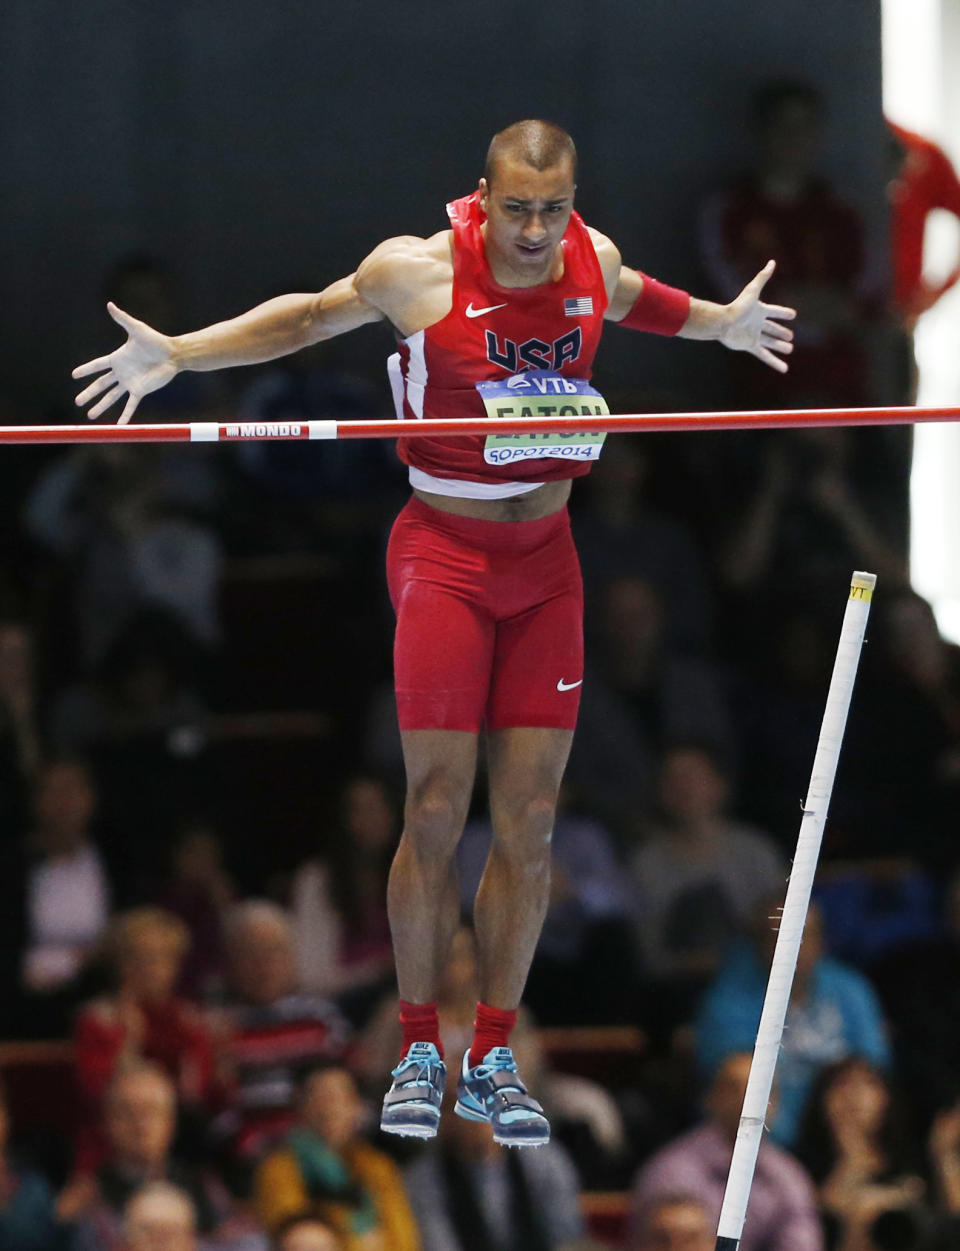 United States' Ashton Eaton clears the bar in the pole-vault of the heptathlon during the Athletics World Indoor Championships in Sopot, Poland, Saturday, March 8, 2014. (AP Photo/Petr David Josek)